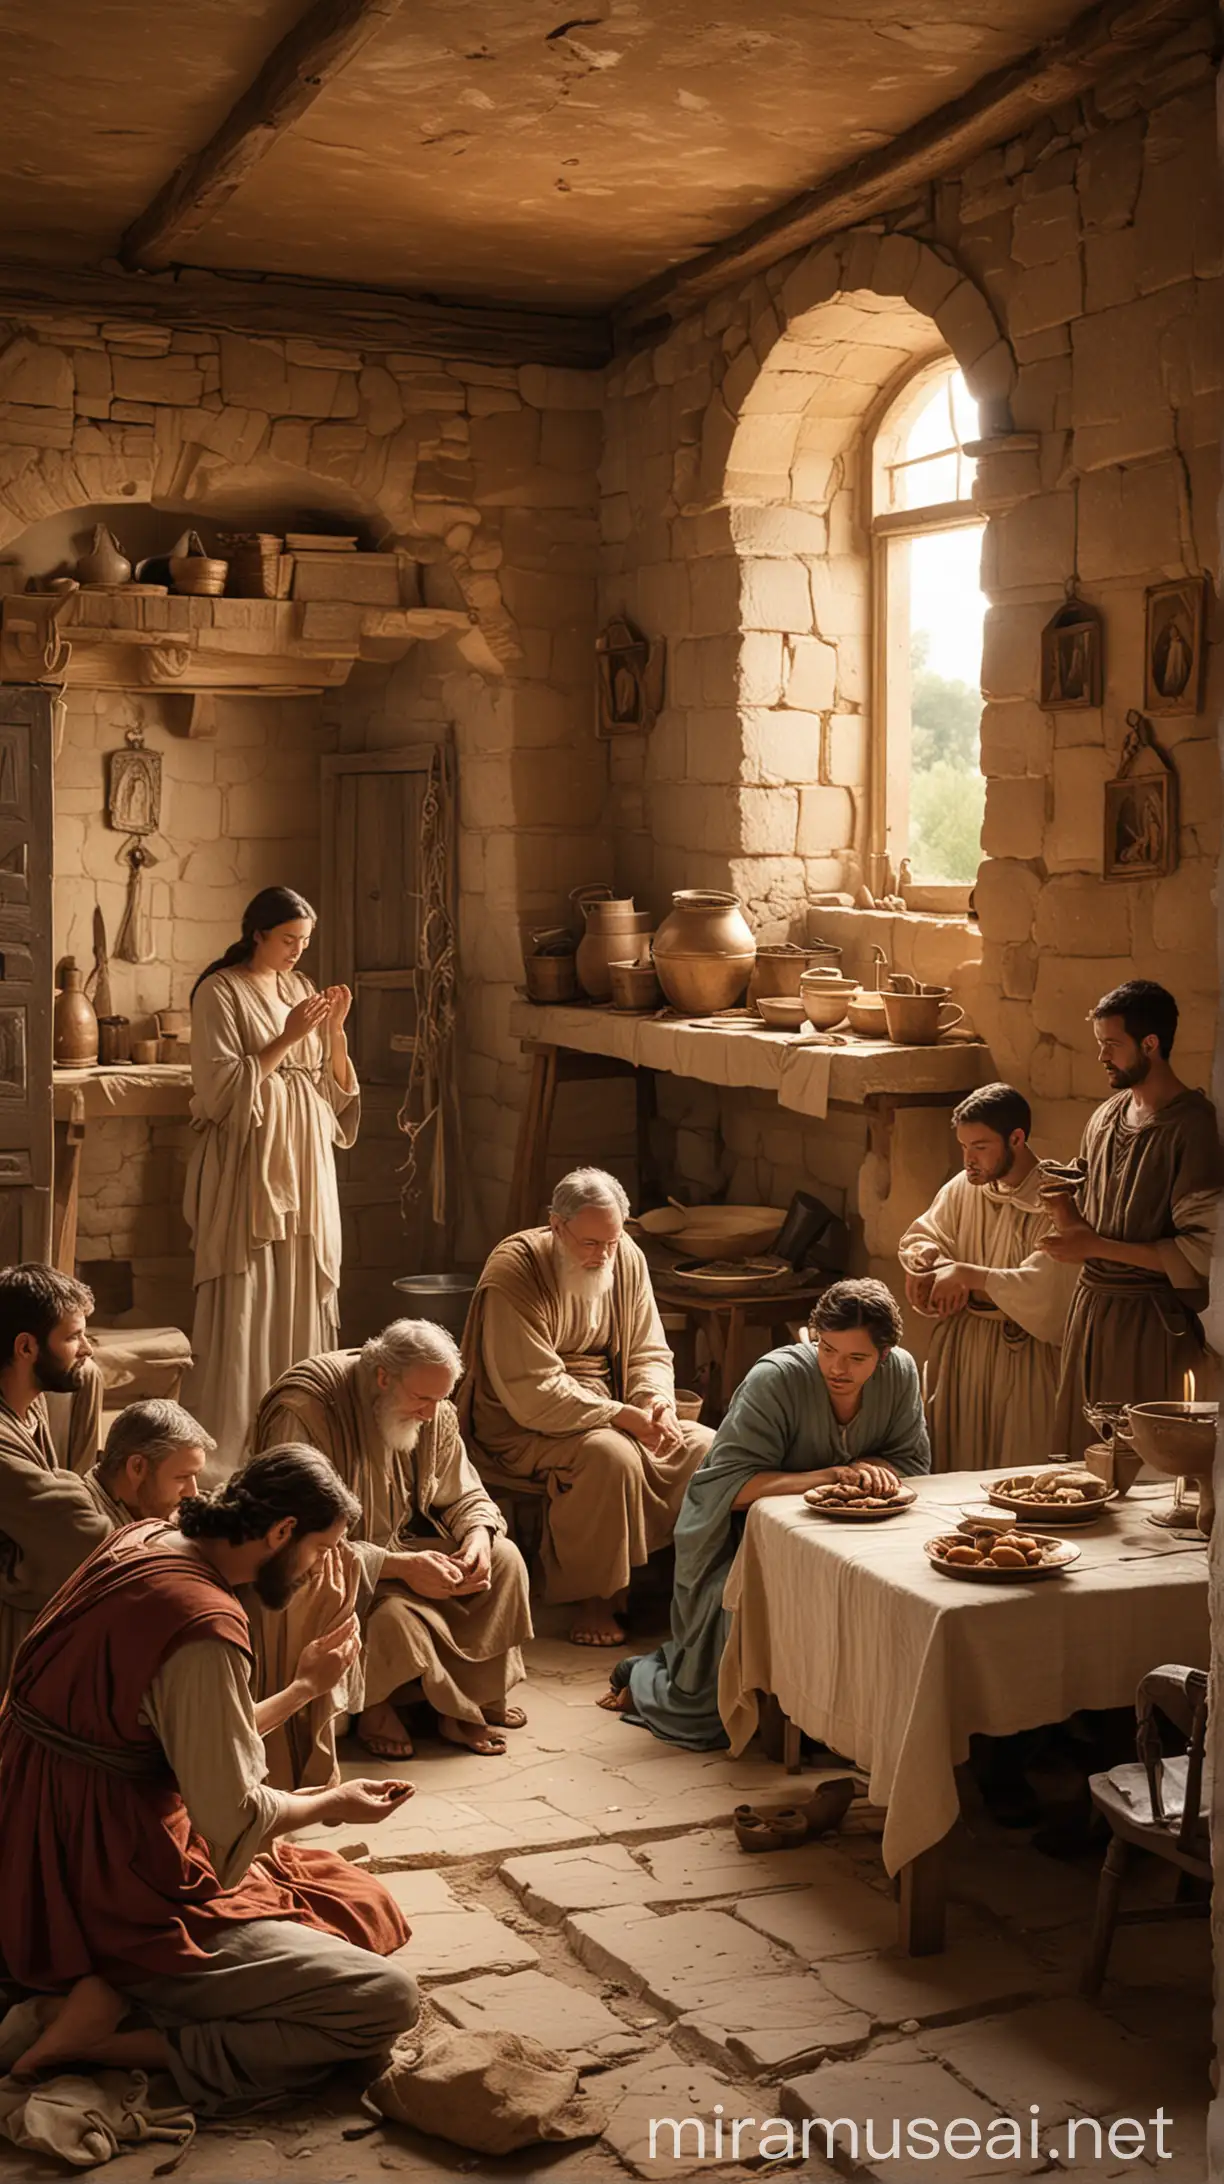 Visualize a bustling ancient household with people engaged in discussion, prayer, and fellowship, depicting Philemon's residence as a center of Christian activity.In ancient world 